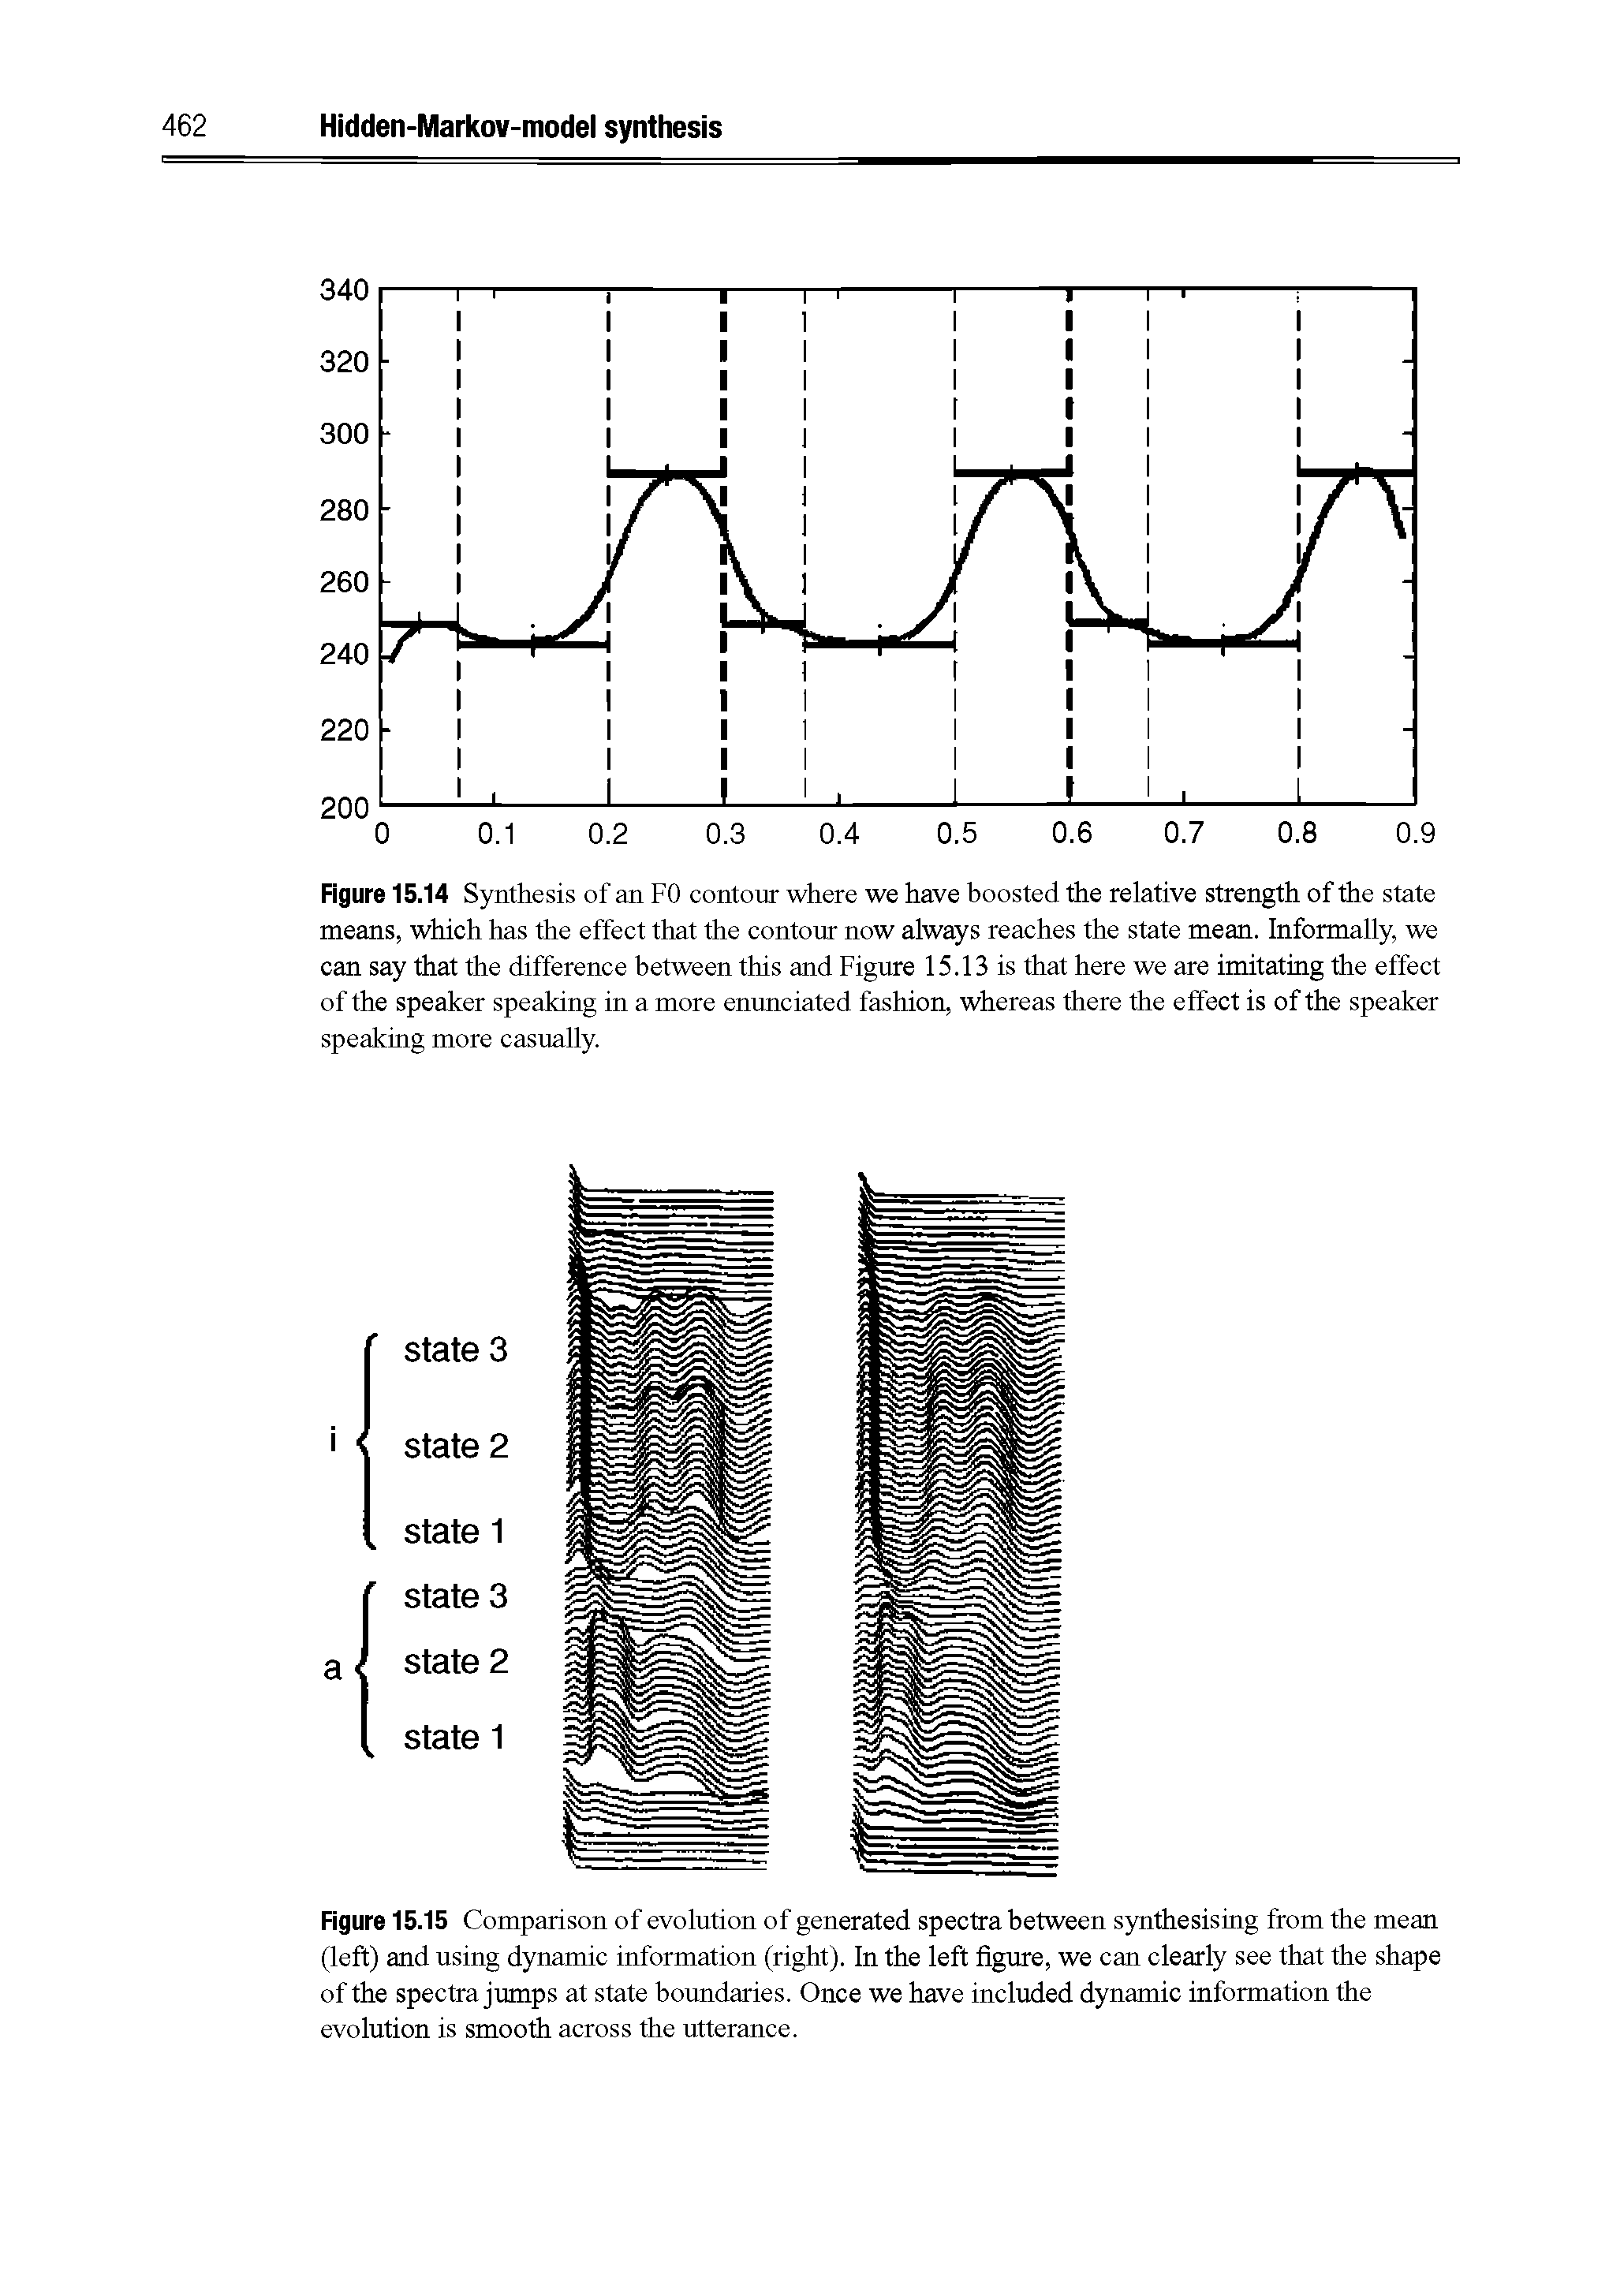 Figure 15.15 Comparison of evolution of generated spectra between synthesising from the mean (left) and using dynamic information (right). In the left figure, we can clearly see that the shape of the spectra jumps at state boundaries. Once we have included dynamic information the evolution is smooth across the utterance.